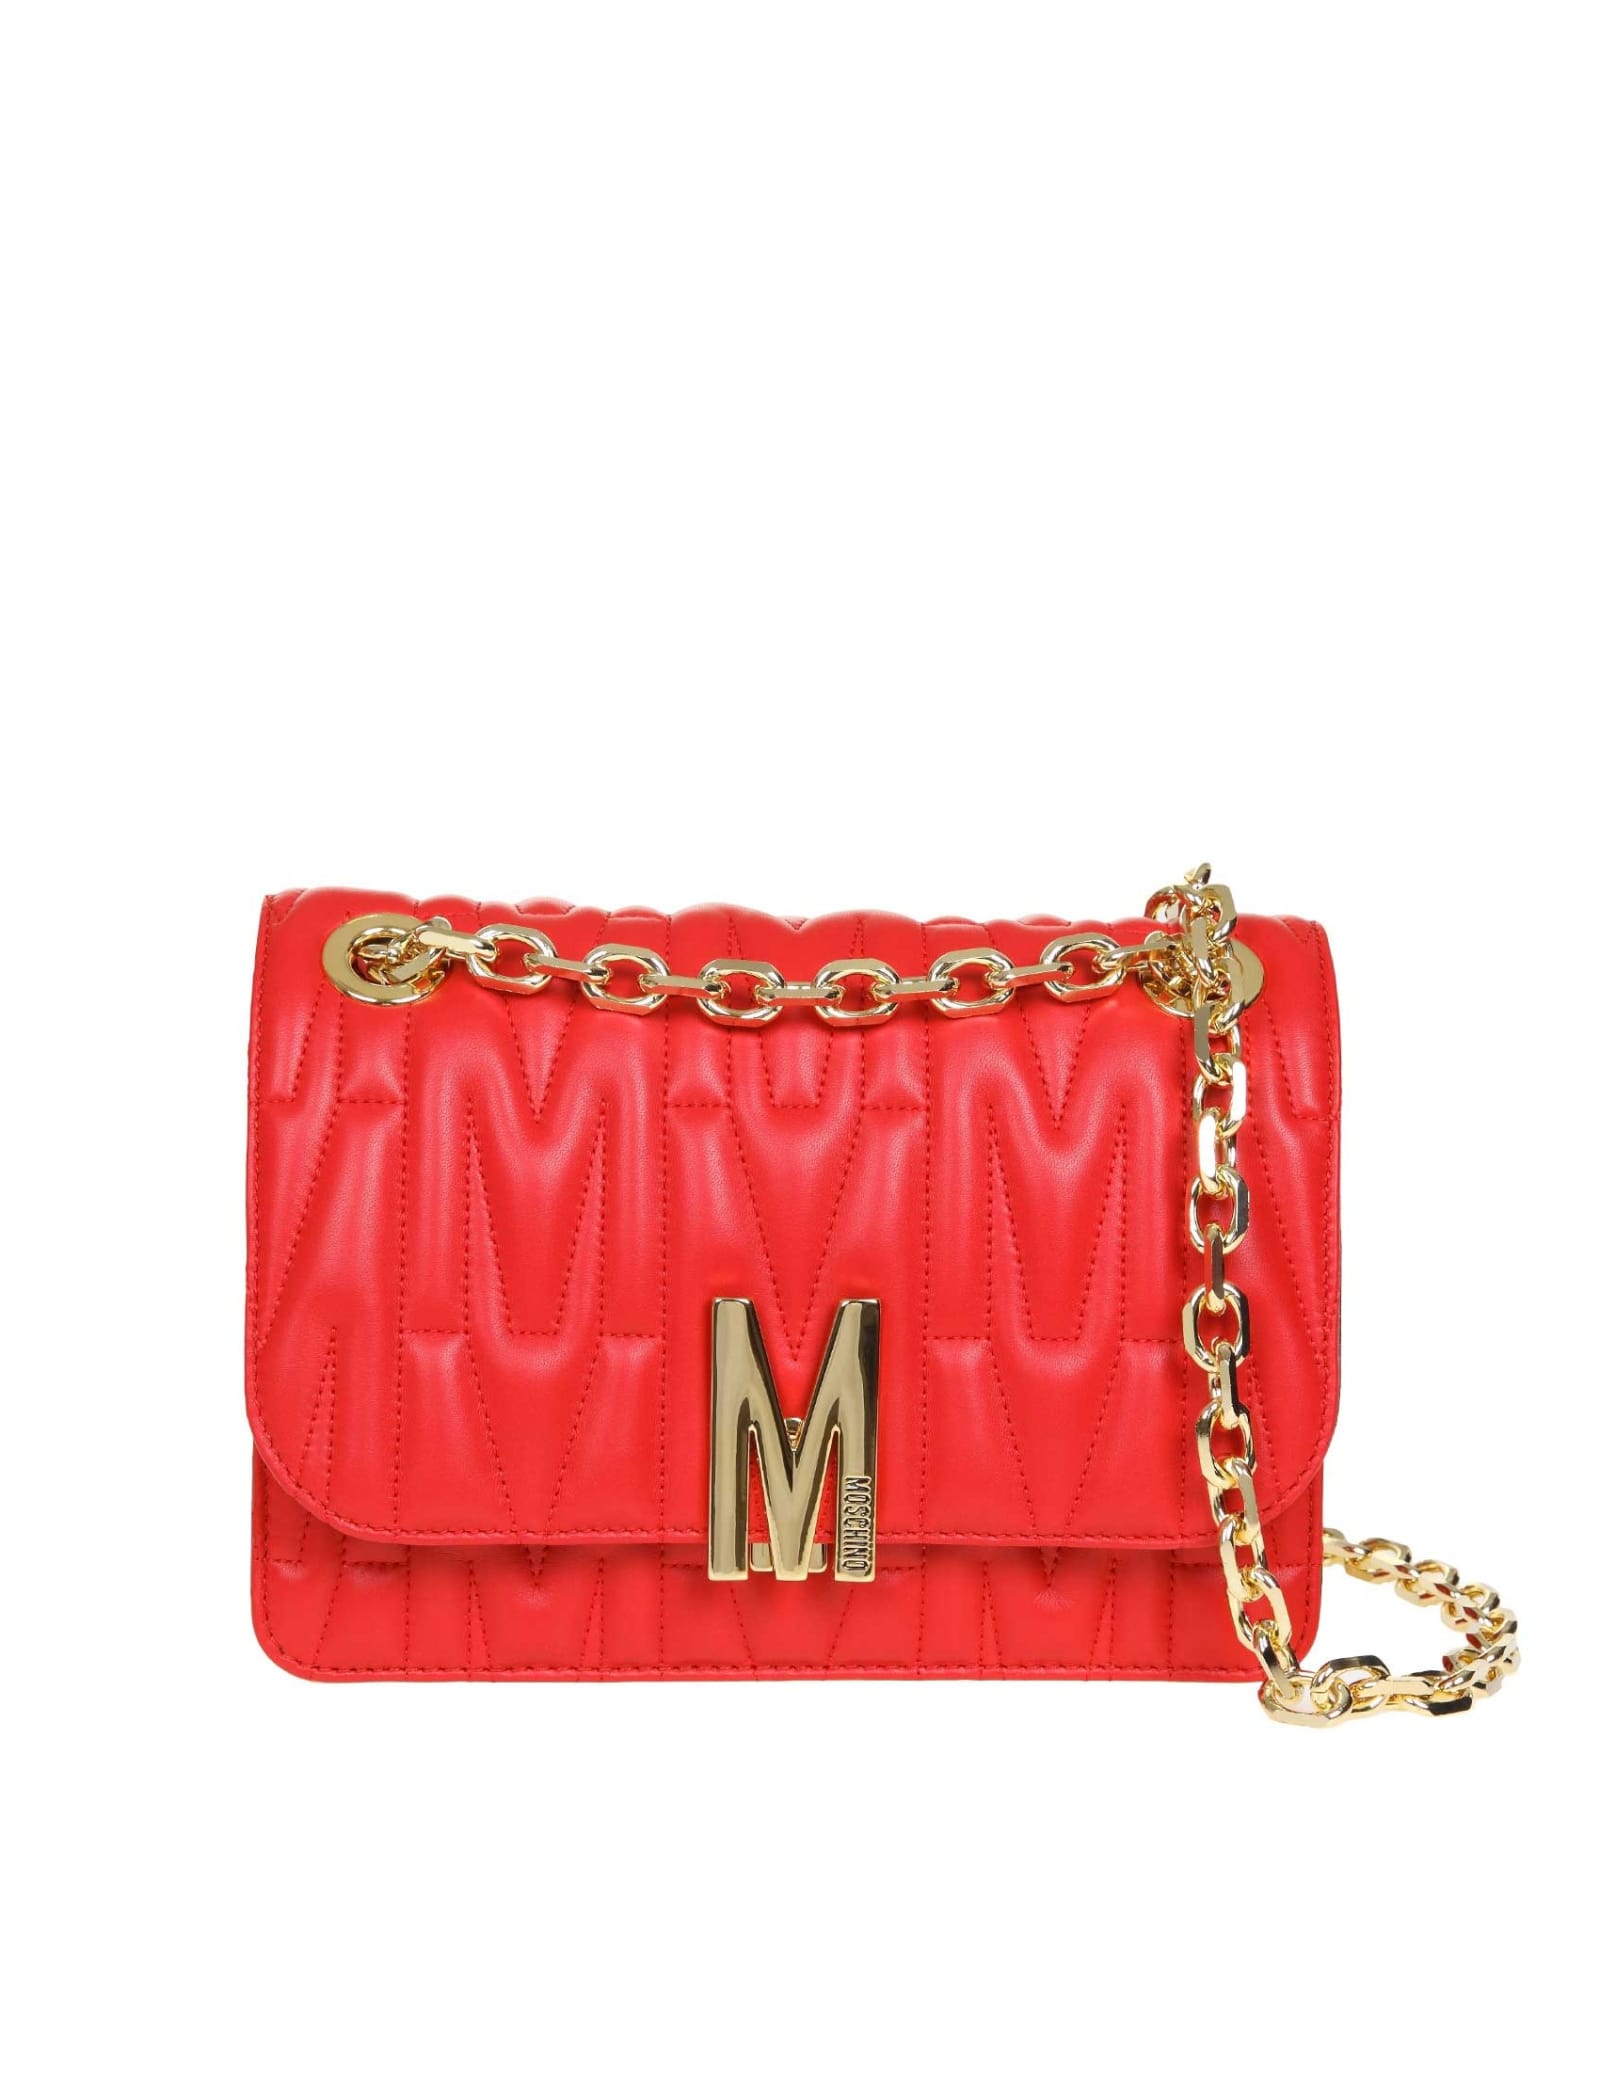 MOSCHINO M QUILTED CROSSBODY BAG IN RED QUILTED LEATHER,11232418